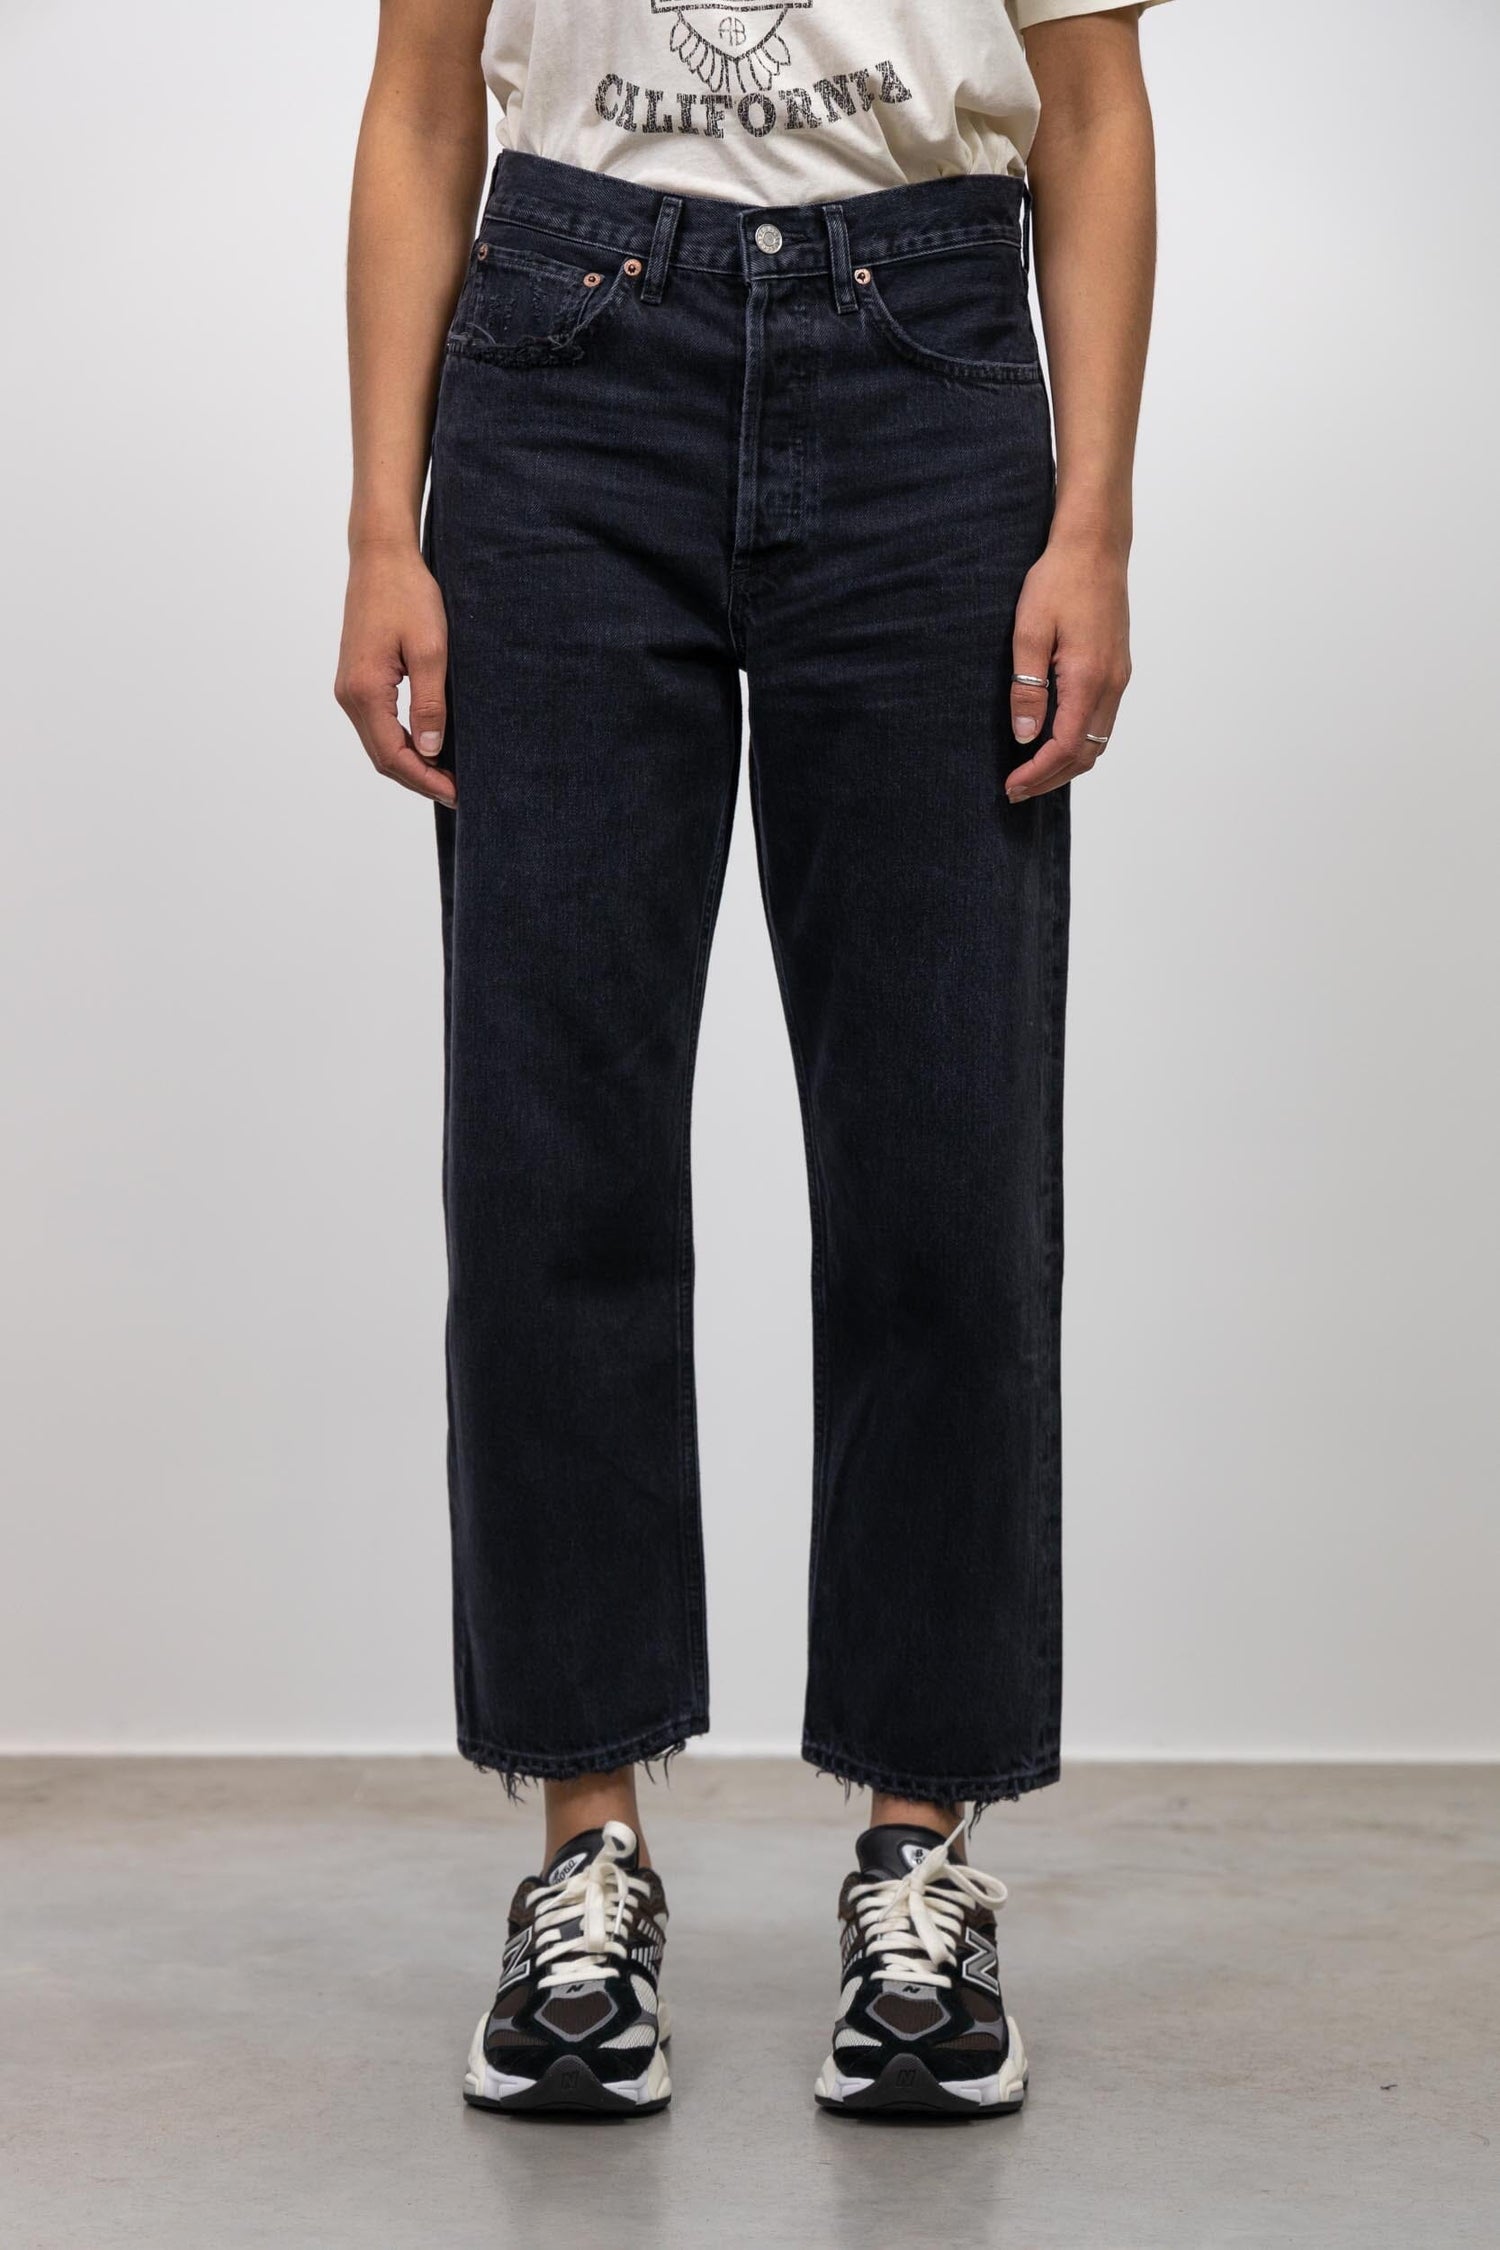 90S CROP JEANS IN TAR JEANS AGOLDE 